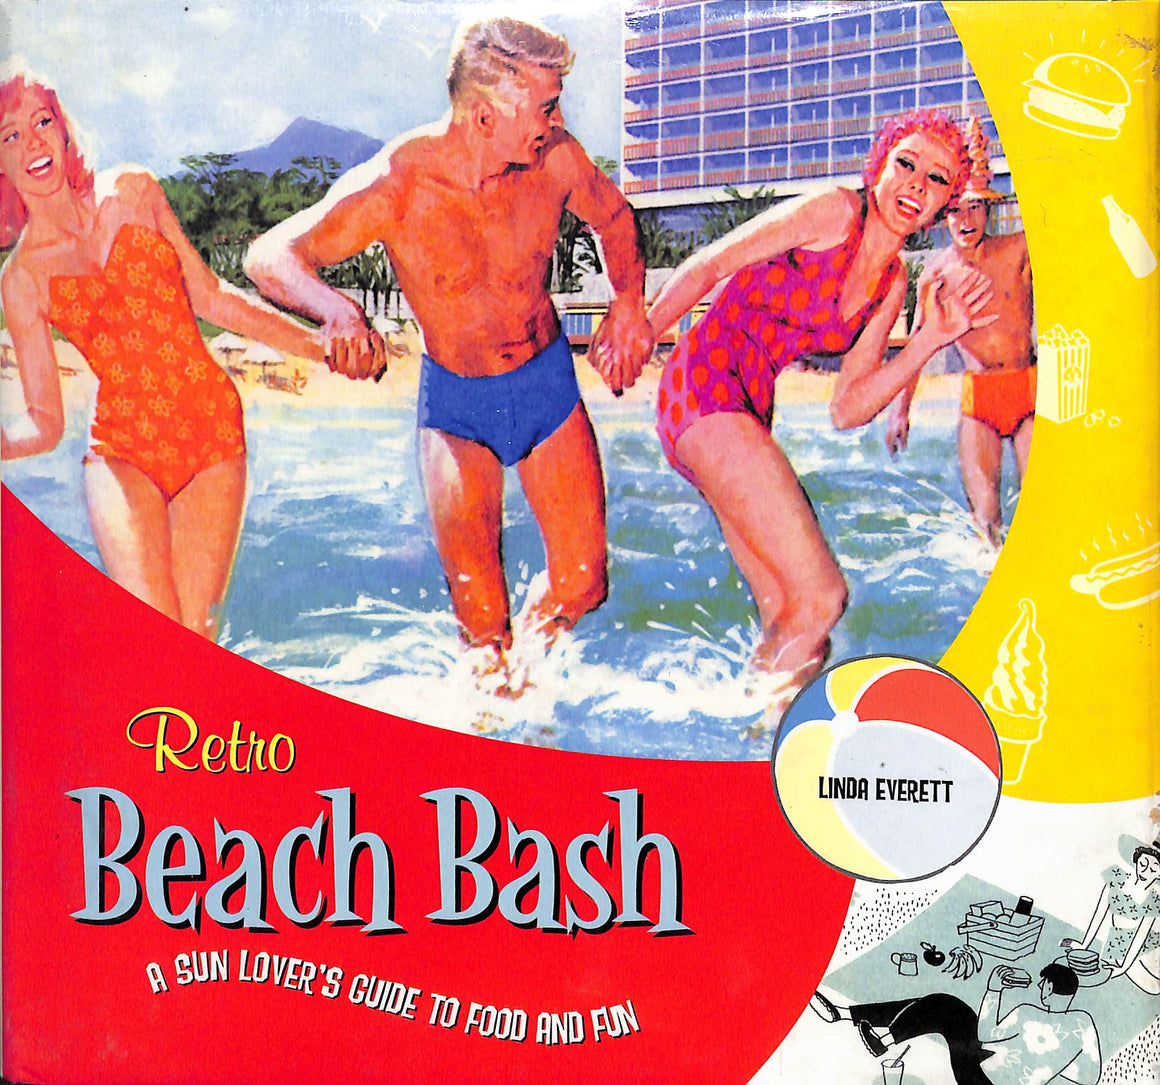 Retro Beach Bash: A Sun Lover's Guide to Food and Fun